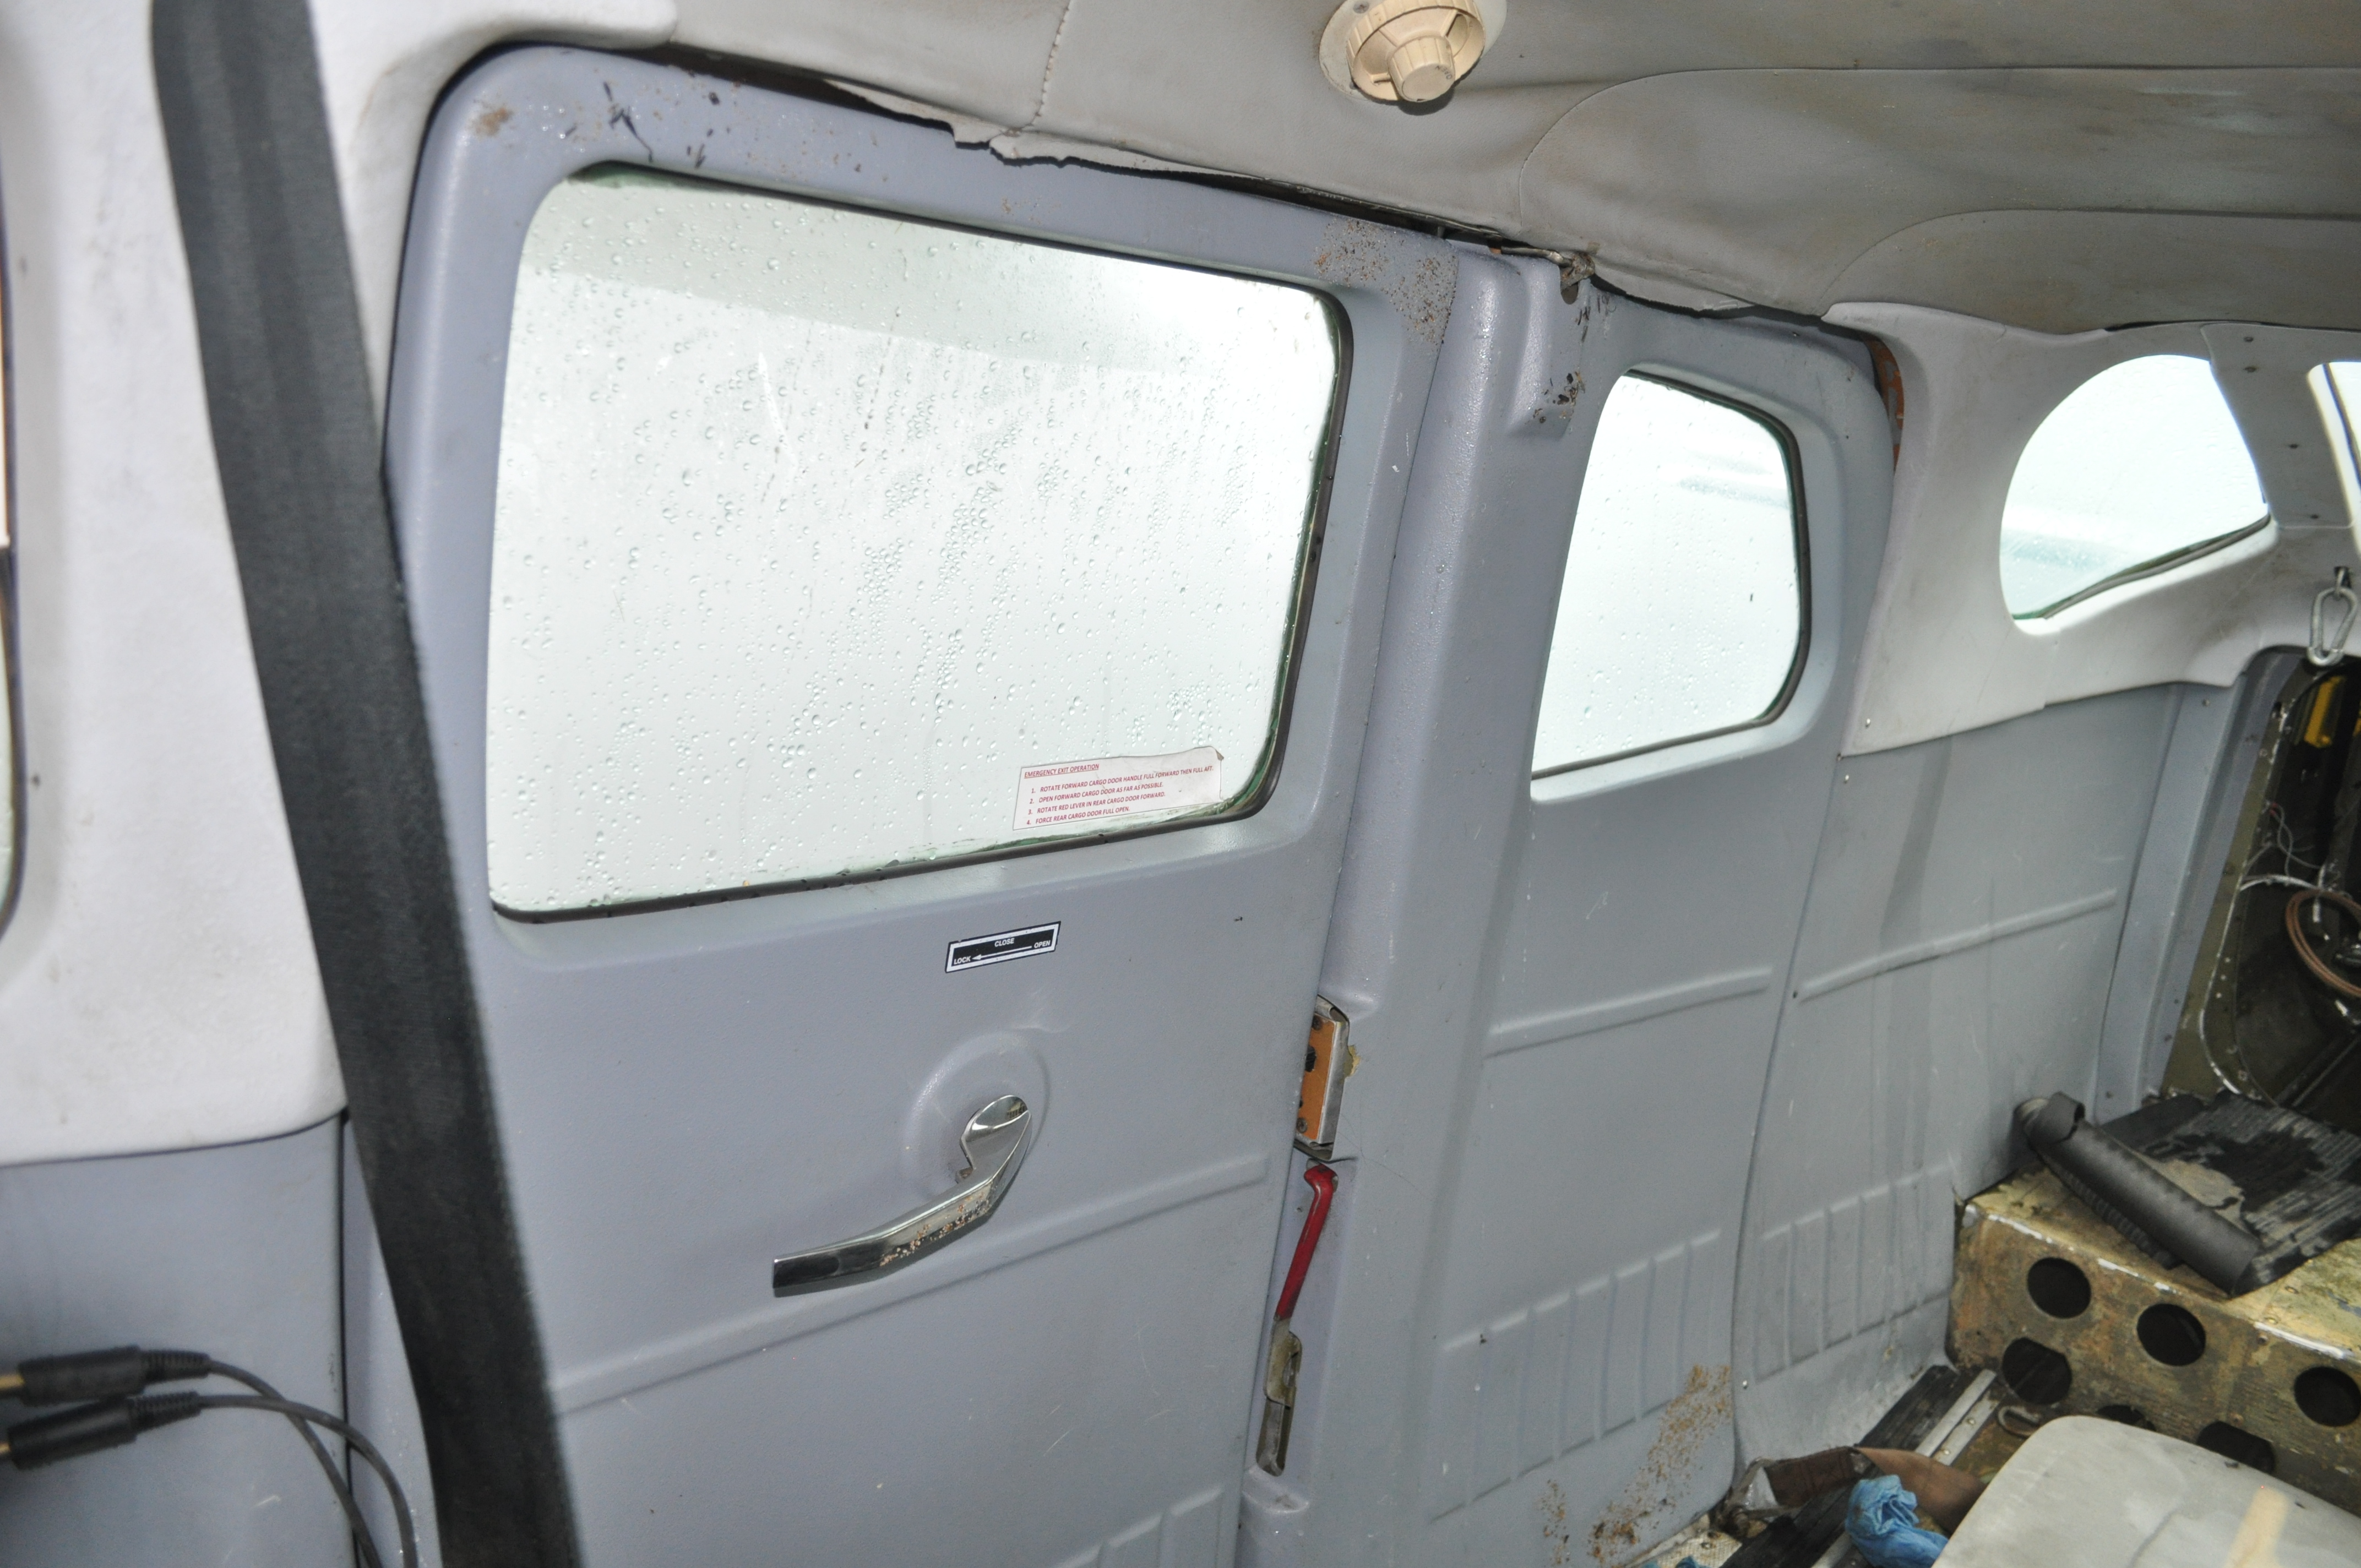 Interior view of the rear double cargo door in the closed position (Source: TSB)